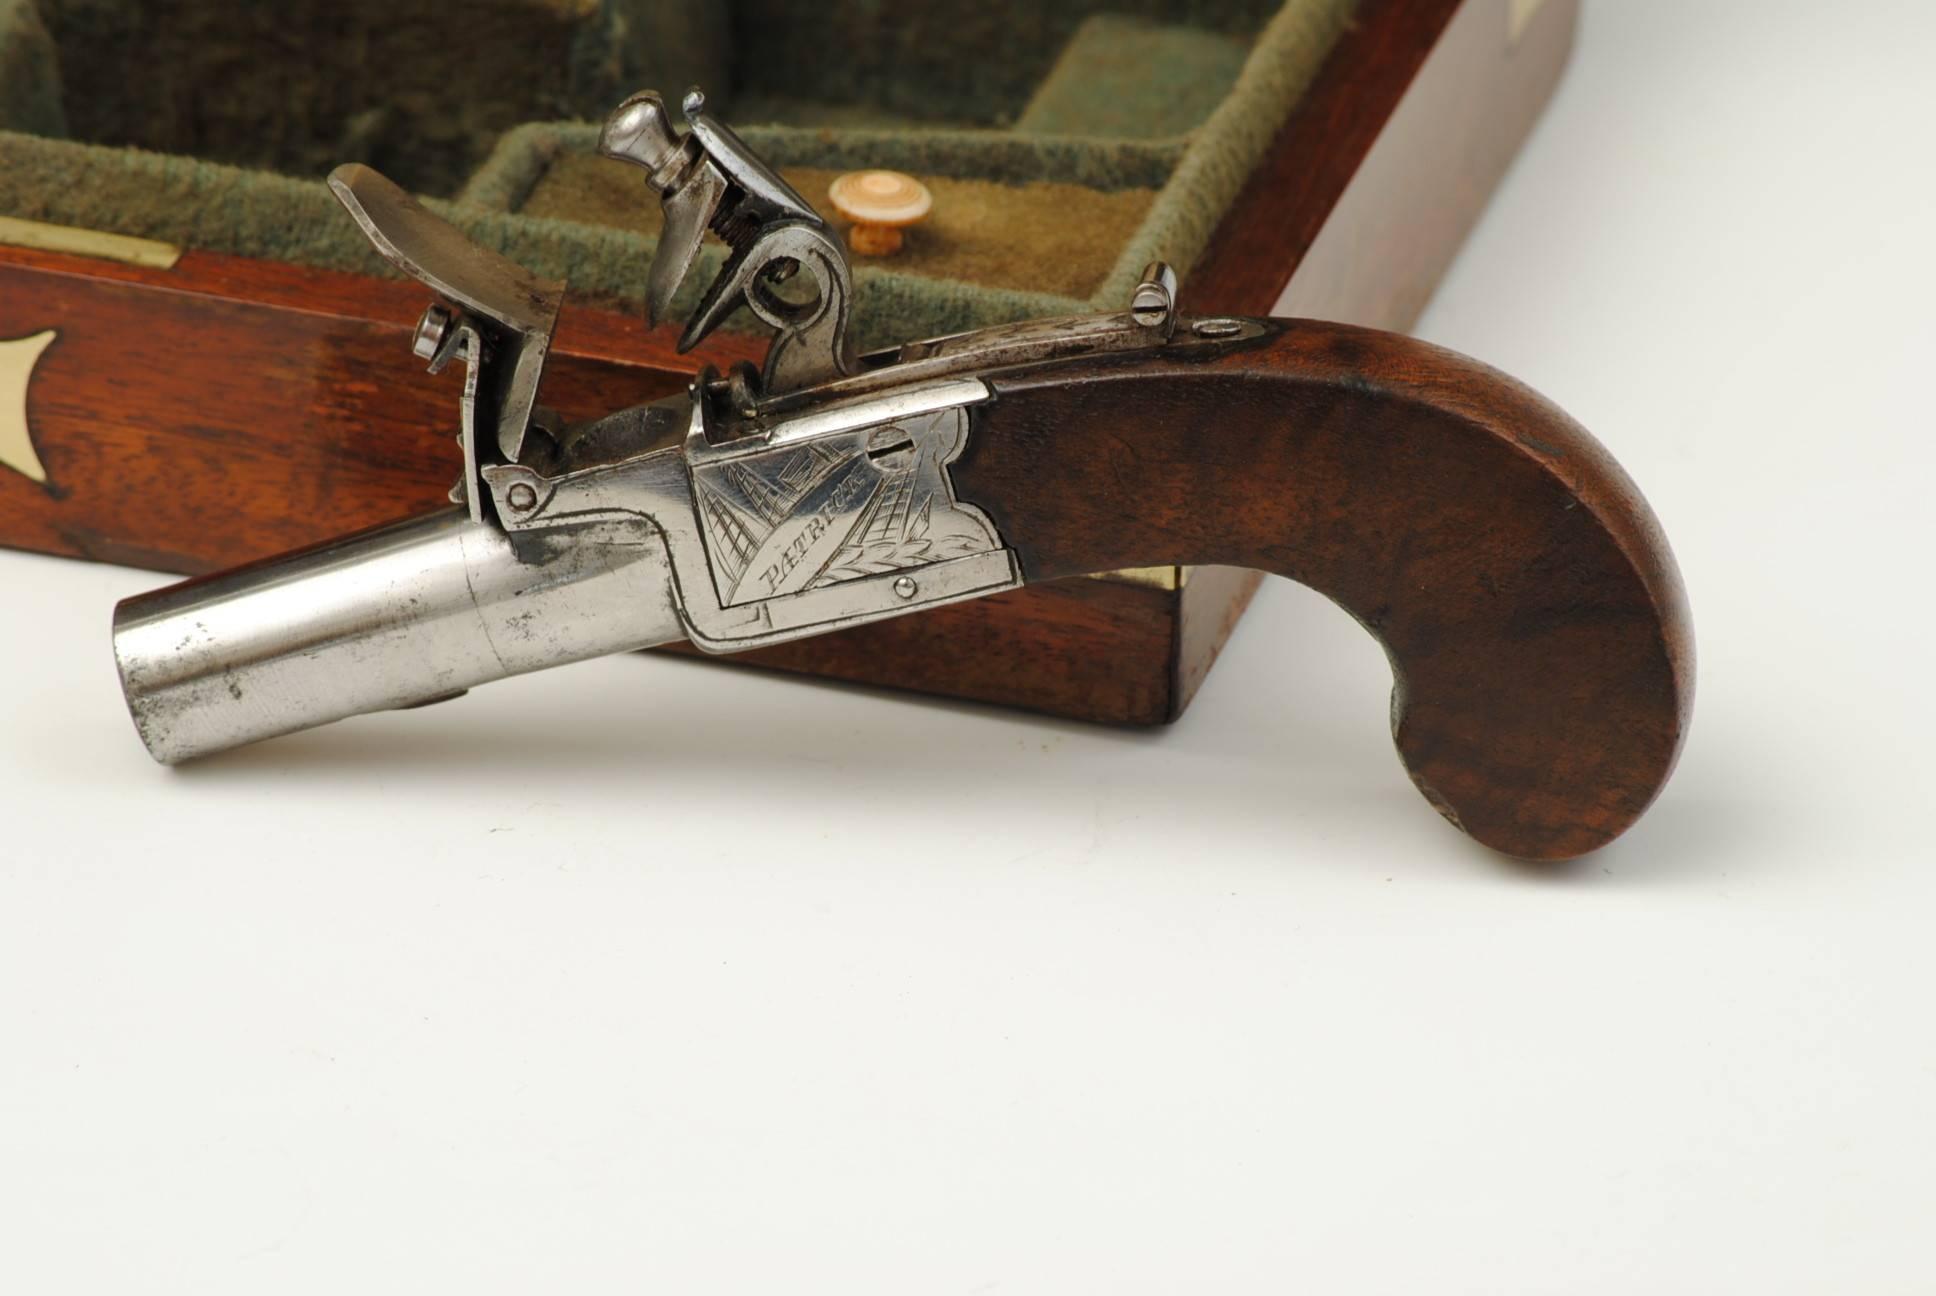 A super pair of box lock pistols in wonderful condition by Edward Patrick of Liverpool , contained in the original mahogany brass bound case with a trade label in the lid. The case contains the original bullet mould and turn key.